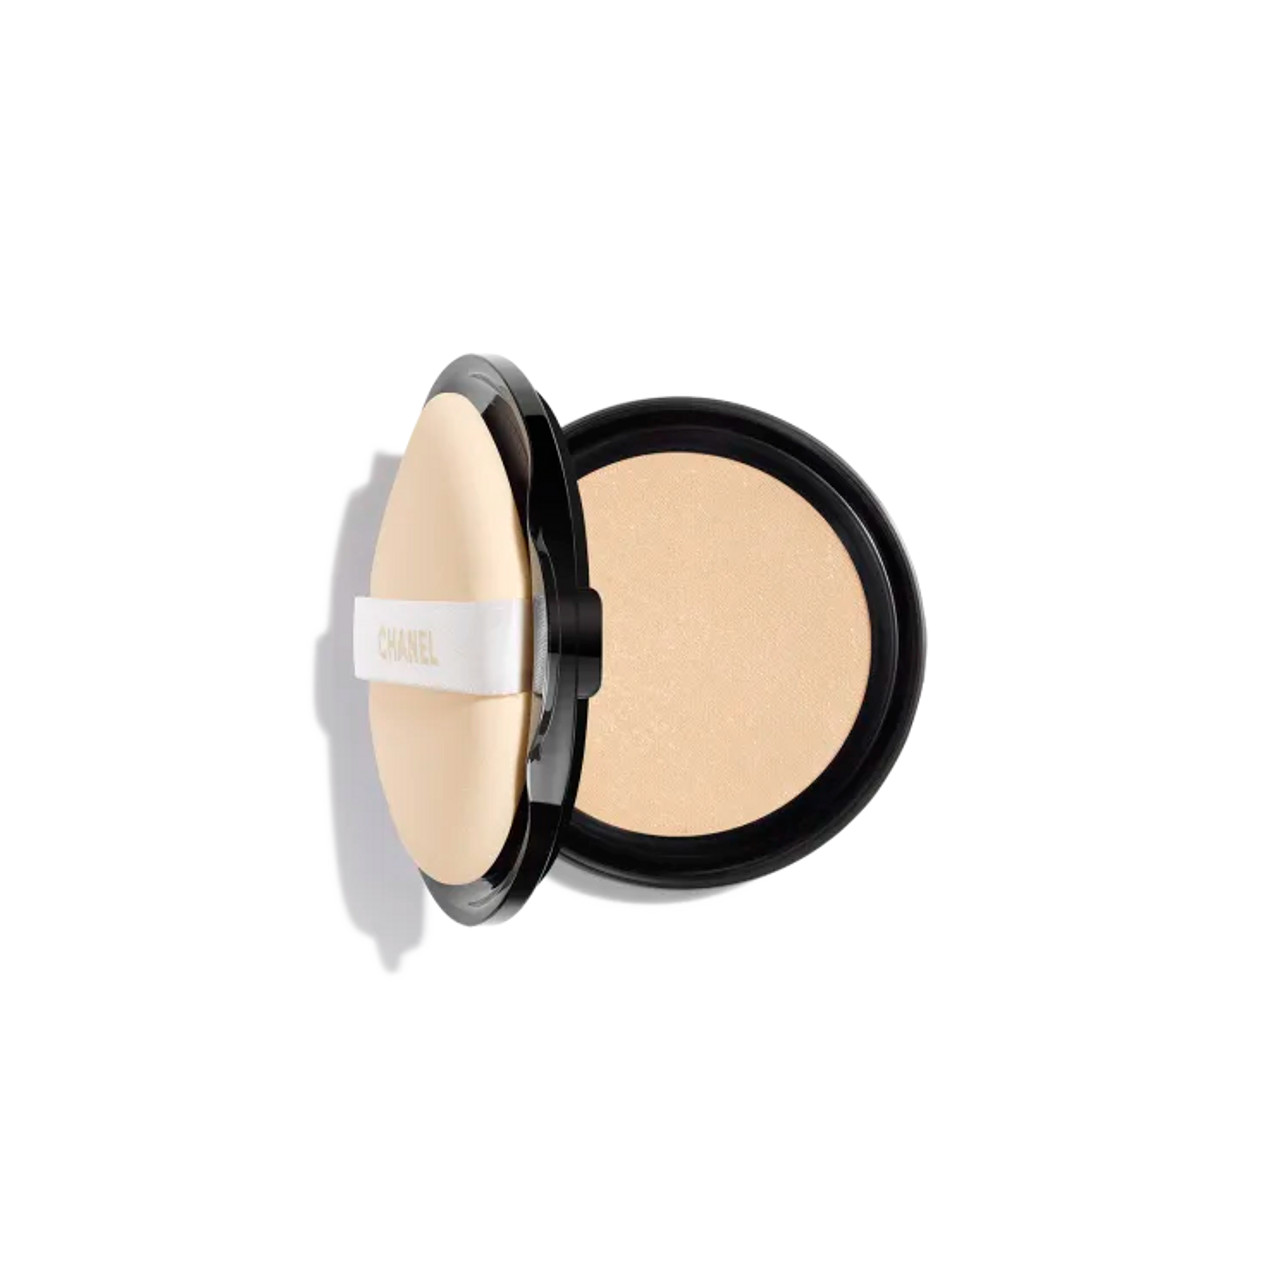 CHANEL Les Beiges Healthy Glow Gel Touch Foundation SPF 30/ PA+++ ~ BD21 